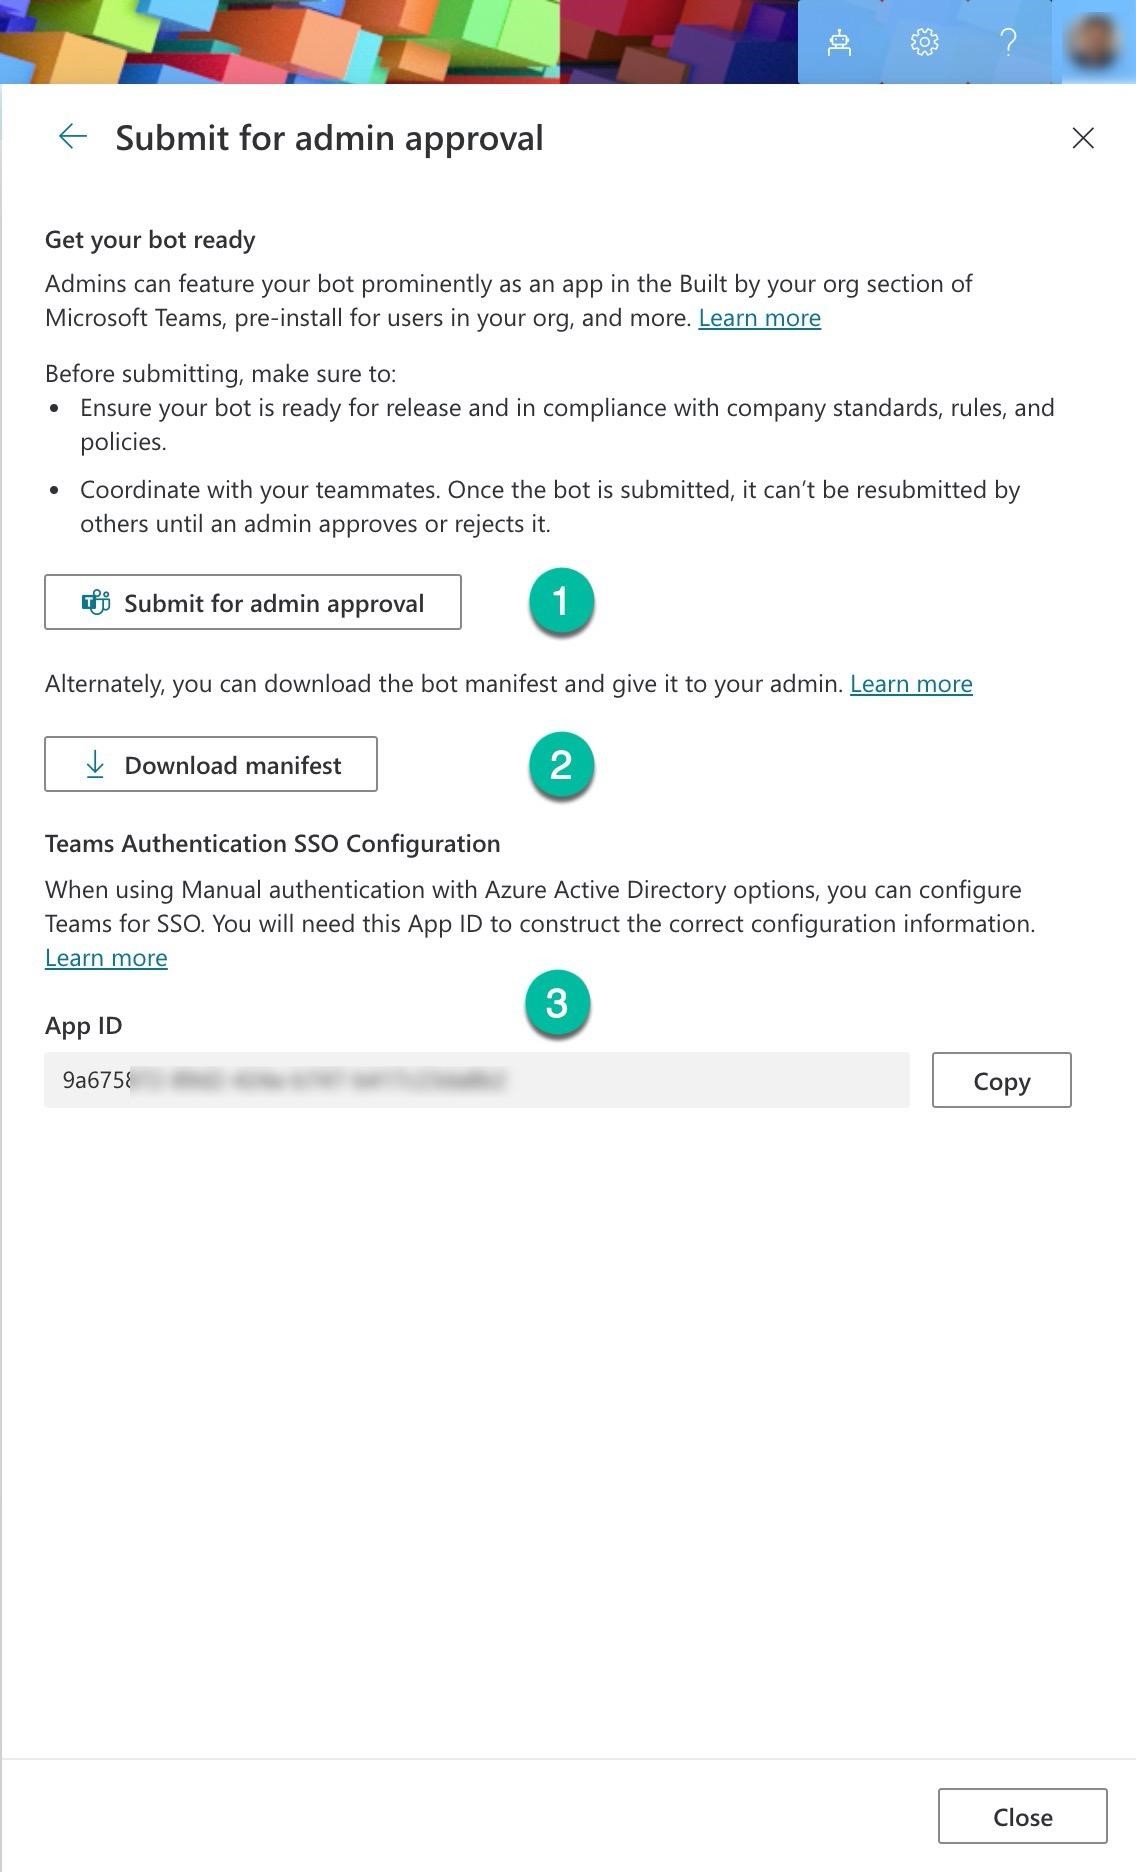 y a 8

< Submit for admin approval x

Get your bot ready

Admins can feature your bot prominently as an app in the Built by your org section of
Microsoft Teams, pre-install for users in your org, and more. Learn more

Before submitting, make sure to:
e Ensure your bot is ready for release and in compliance with company standards, rules, and
policies.

¢ Coordinate with your teammates. Once the bot is submitted, it can’t be resubmitted by
others until an admin approves or rejects it.

5 Submit for admin approval a)

Alternately, you can download the bot manifest and give it to your admin. Learn more

Download manifest So

Teams Authentication SSO Configuration

When using Manual authentication with Azure Active Directory options, you can configure
Teams for SSO. You will need this App ID to construct the correct configuration information.
Learn more

reo ©

9a675% Copy

Close